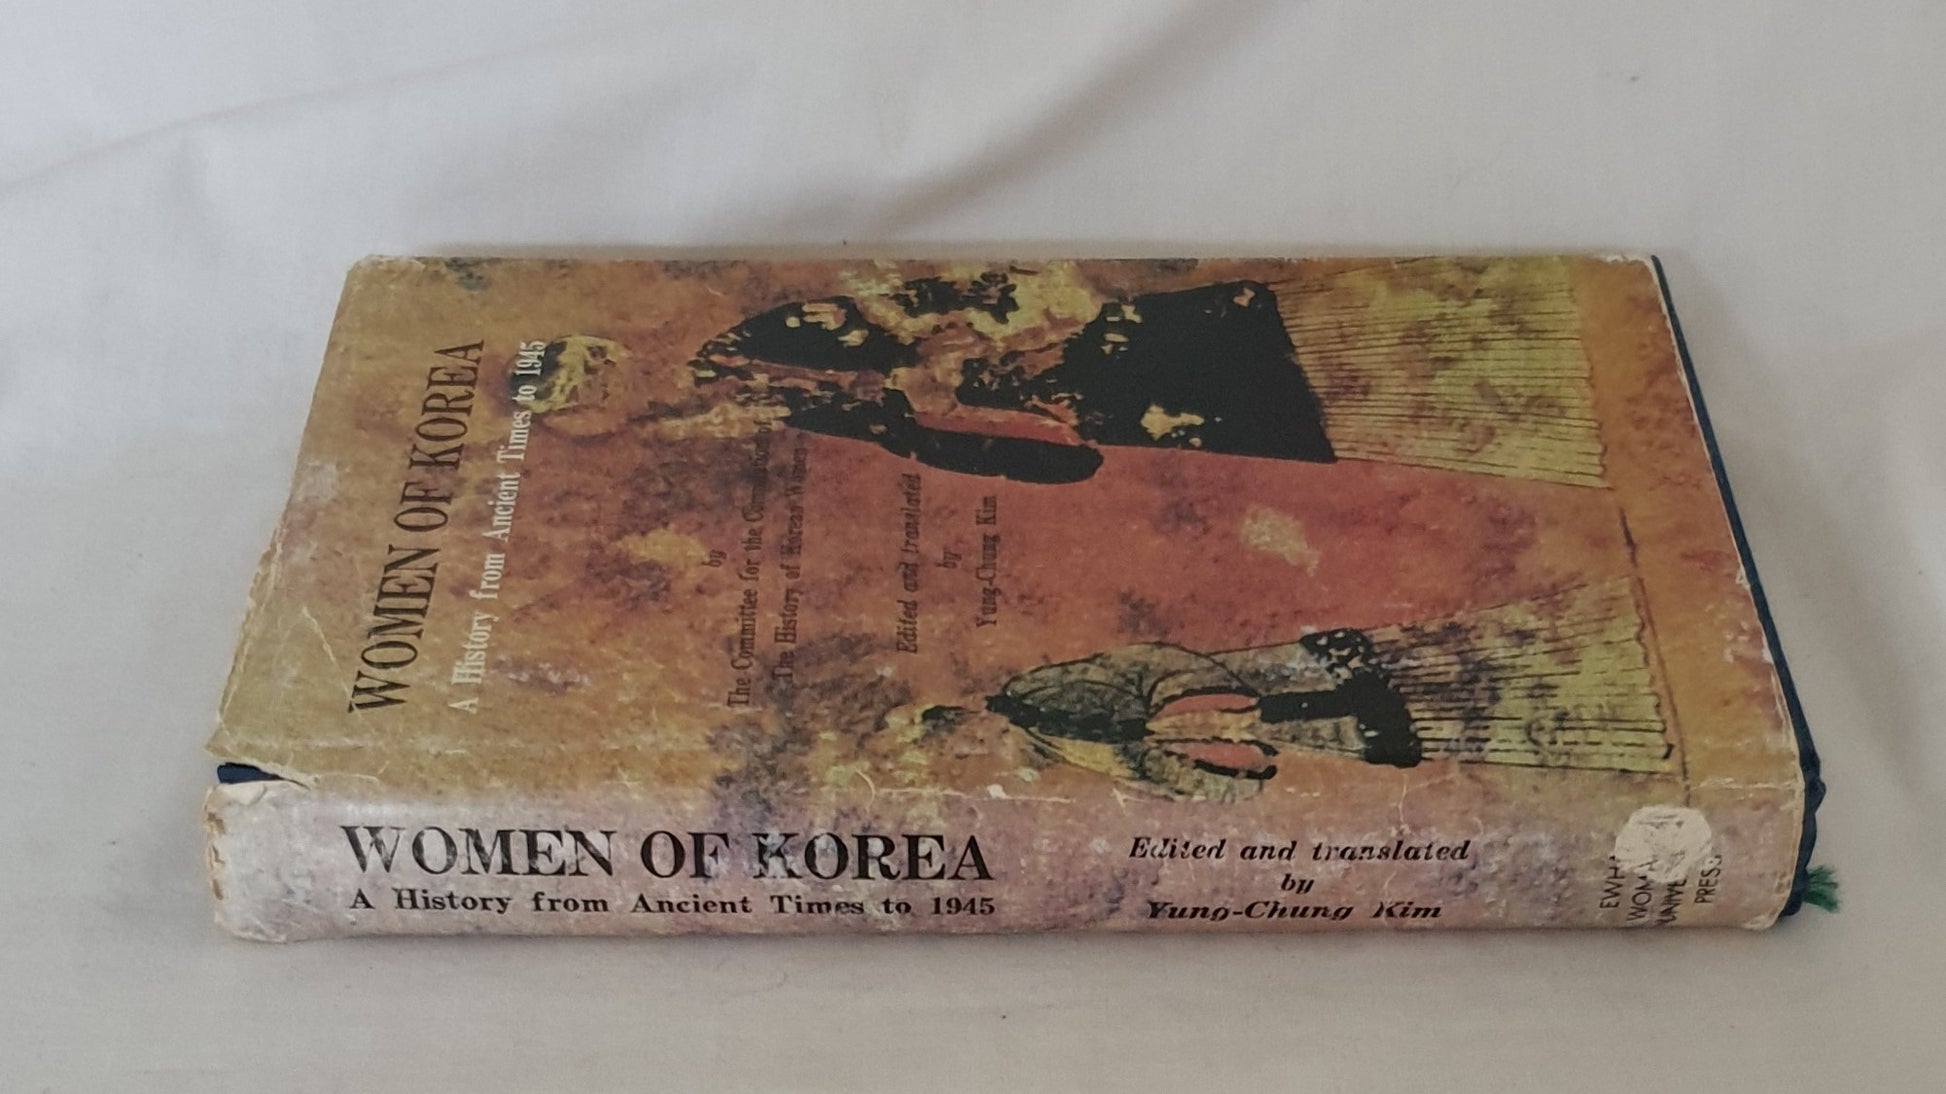 Women of Korea  A History from Ancient Times to 1945  Edited and Translated by Yung-Chung Kim